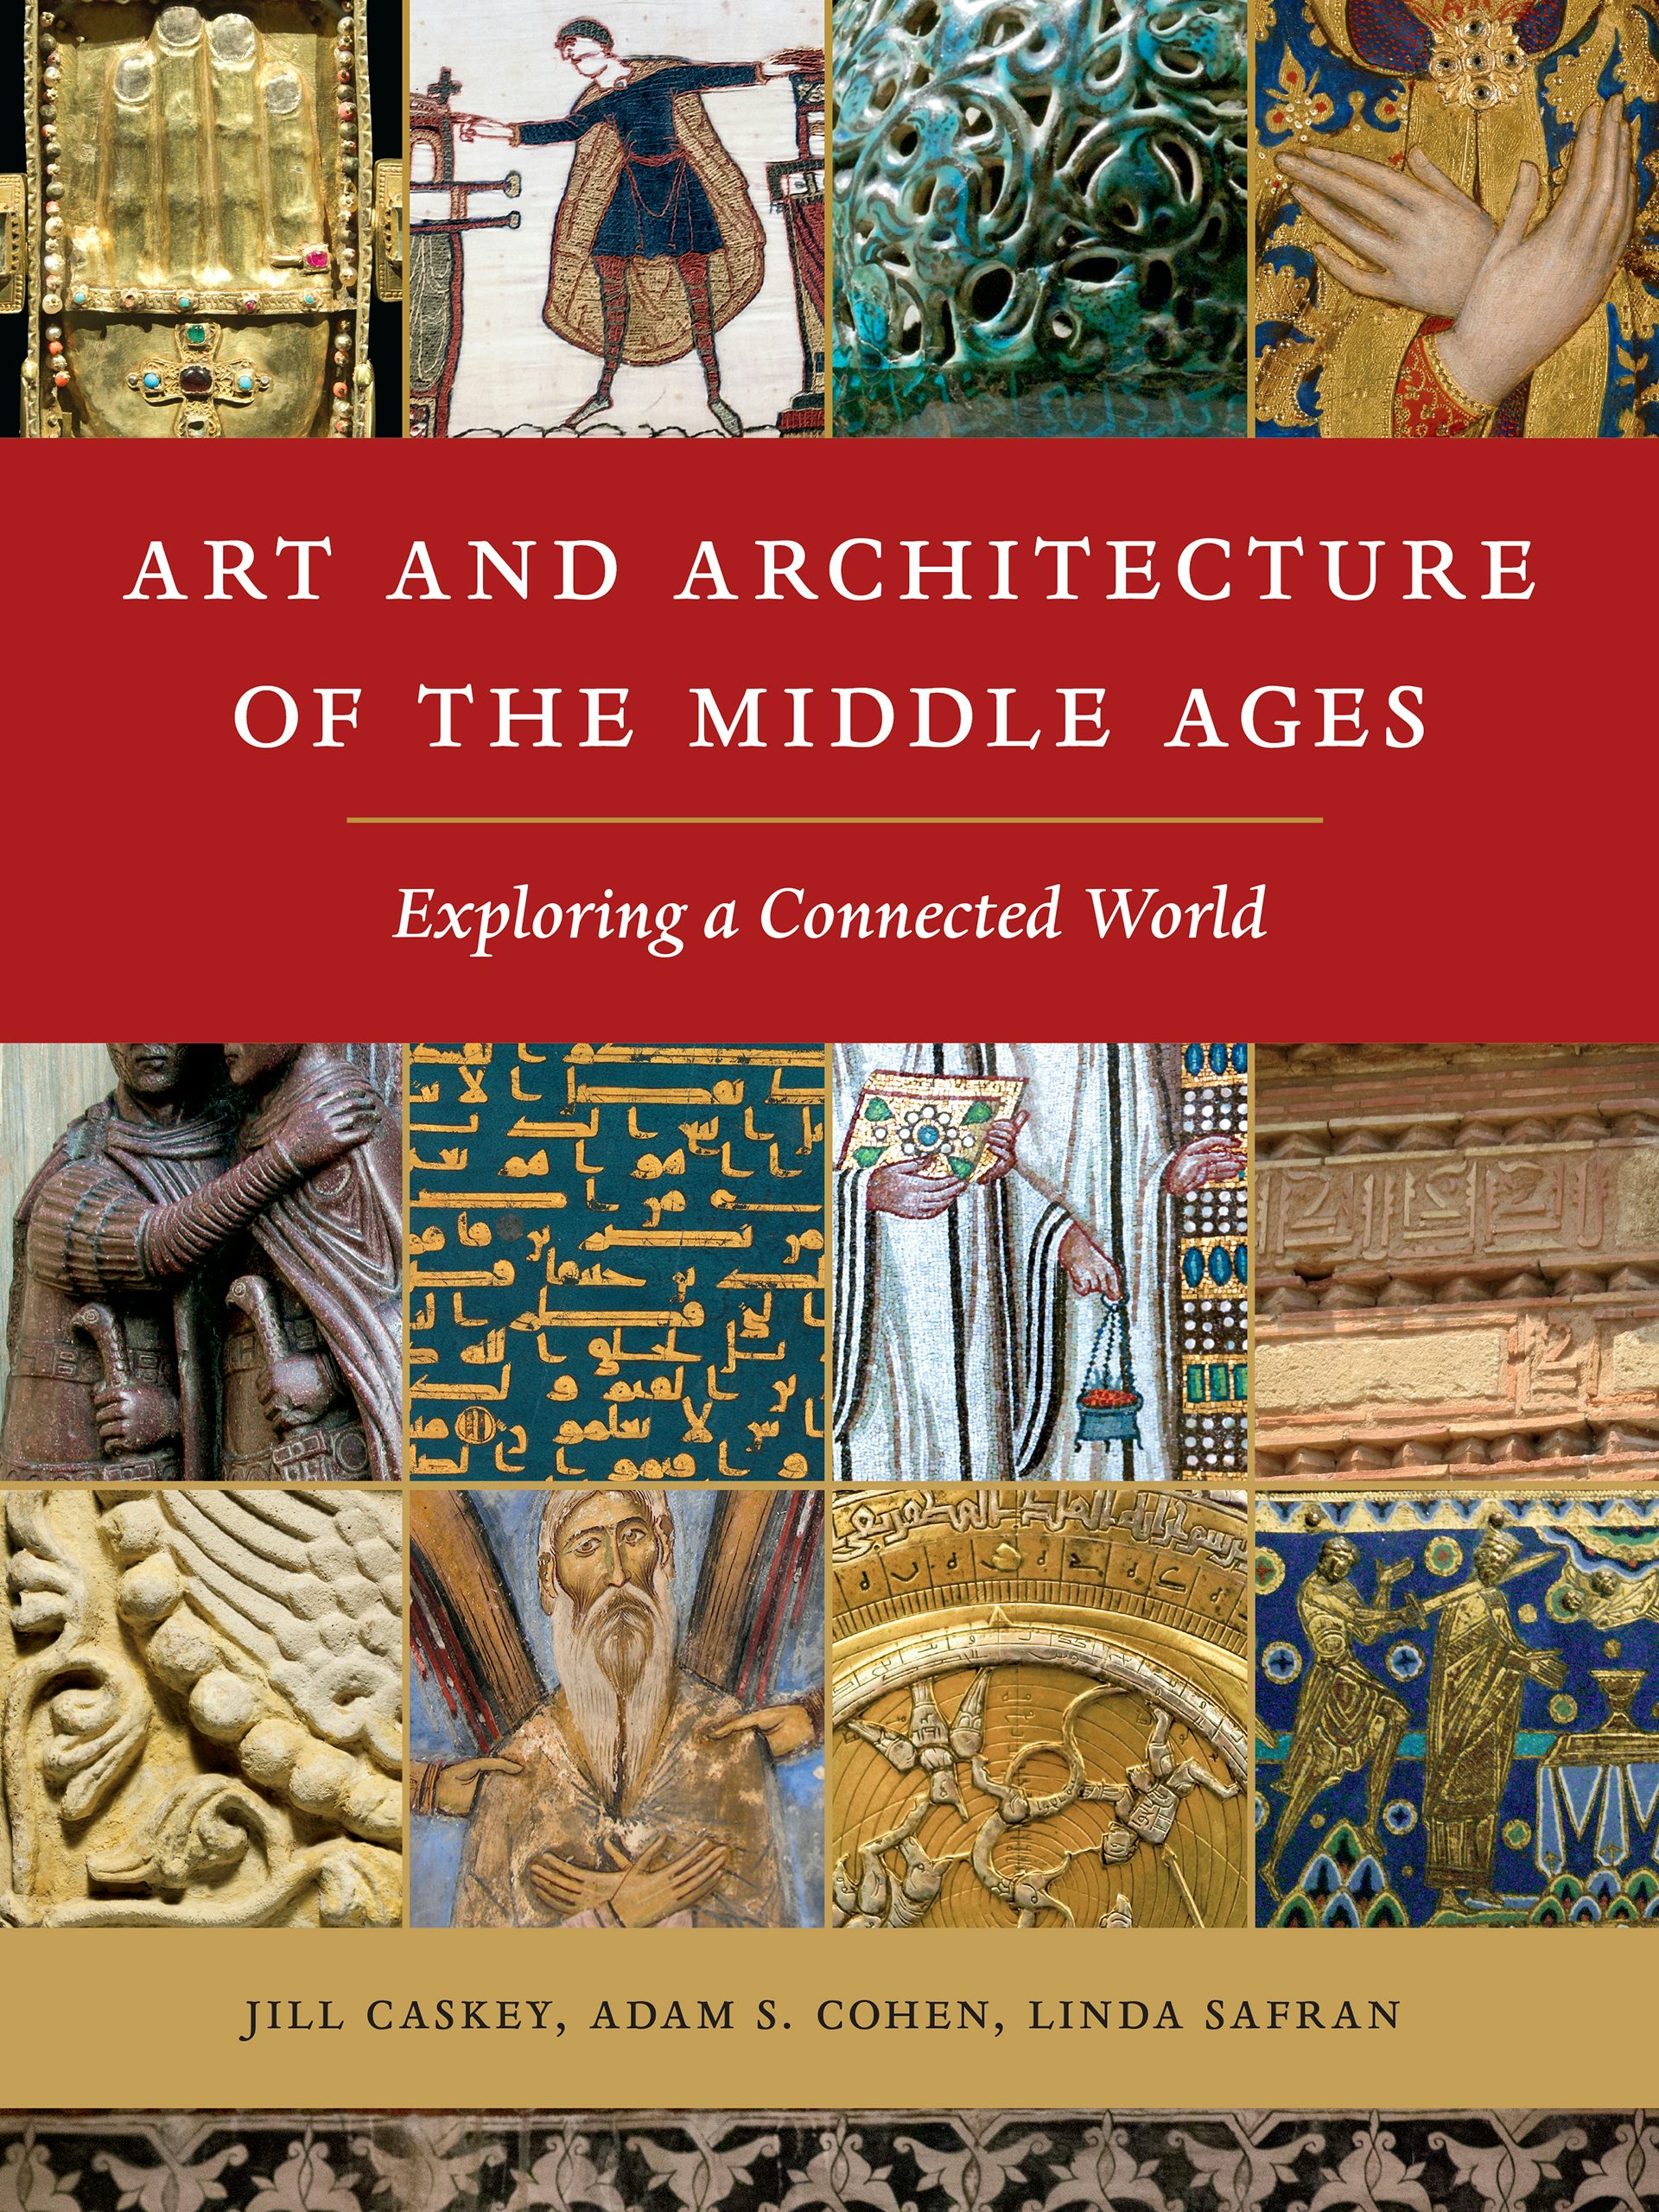 Art and Architecture of the Middle Ages by Jill Caskey, Adam S